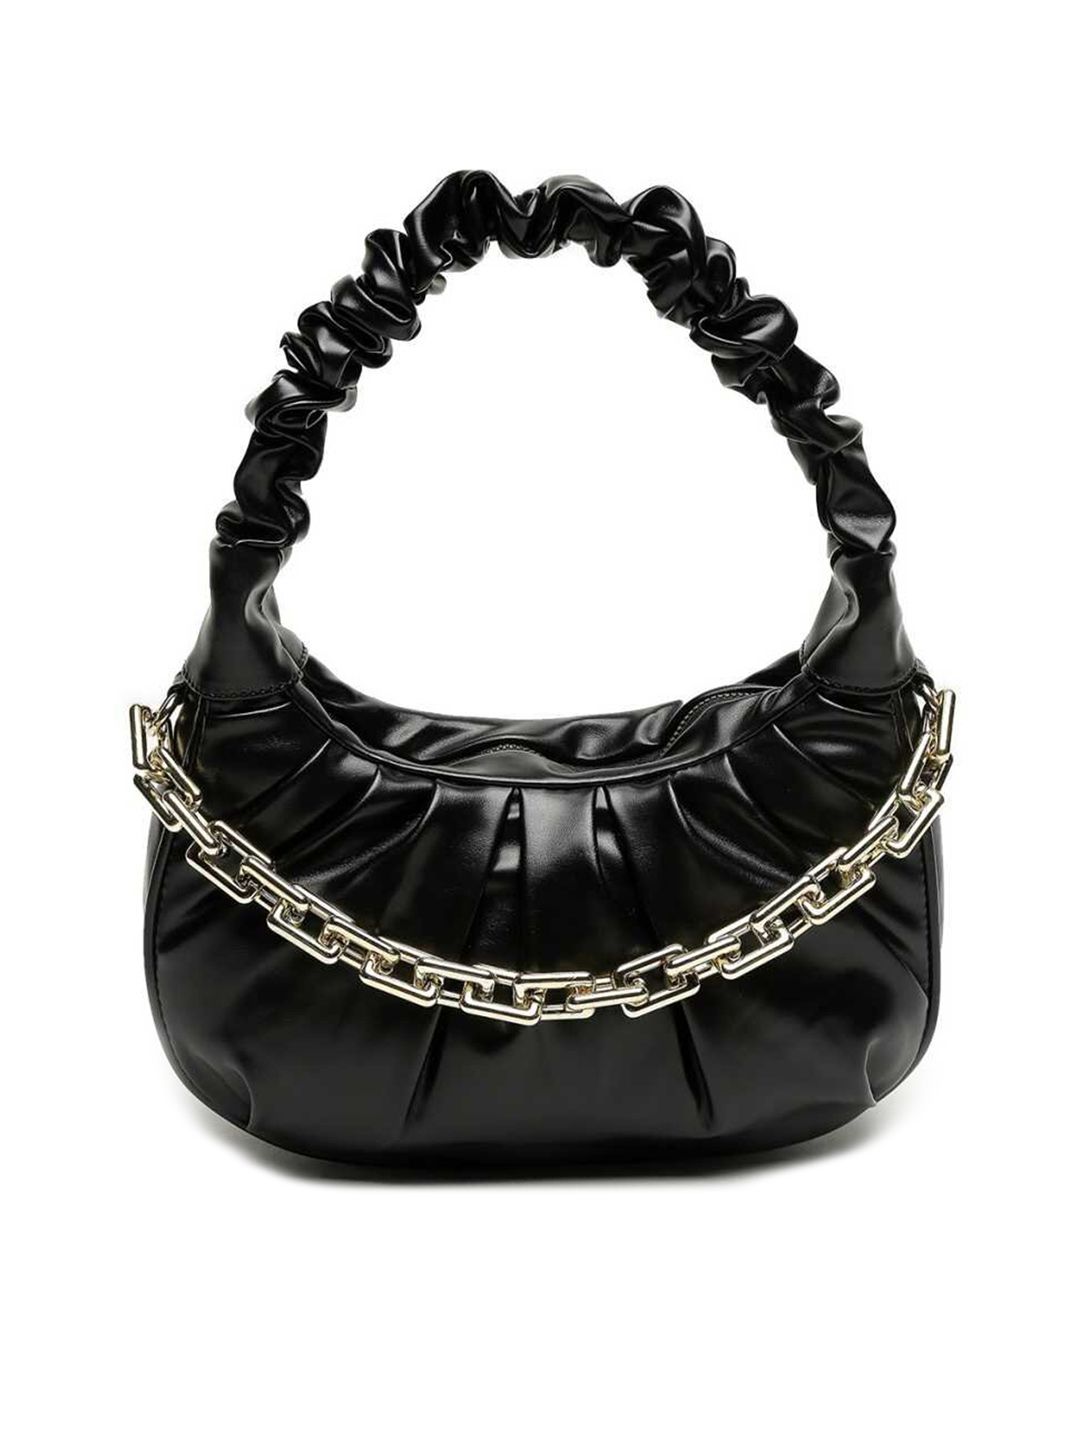 Lychee bags Black PU Structured Handheld Bag Price in India